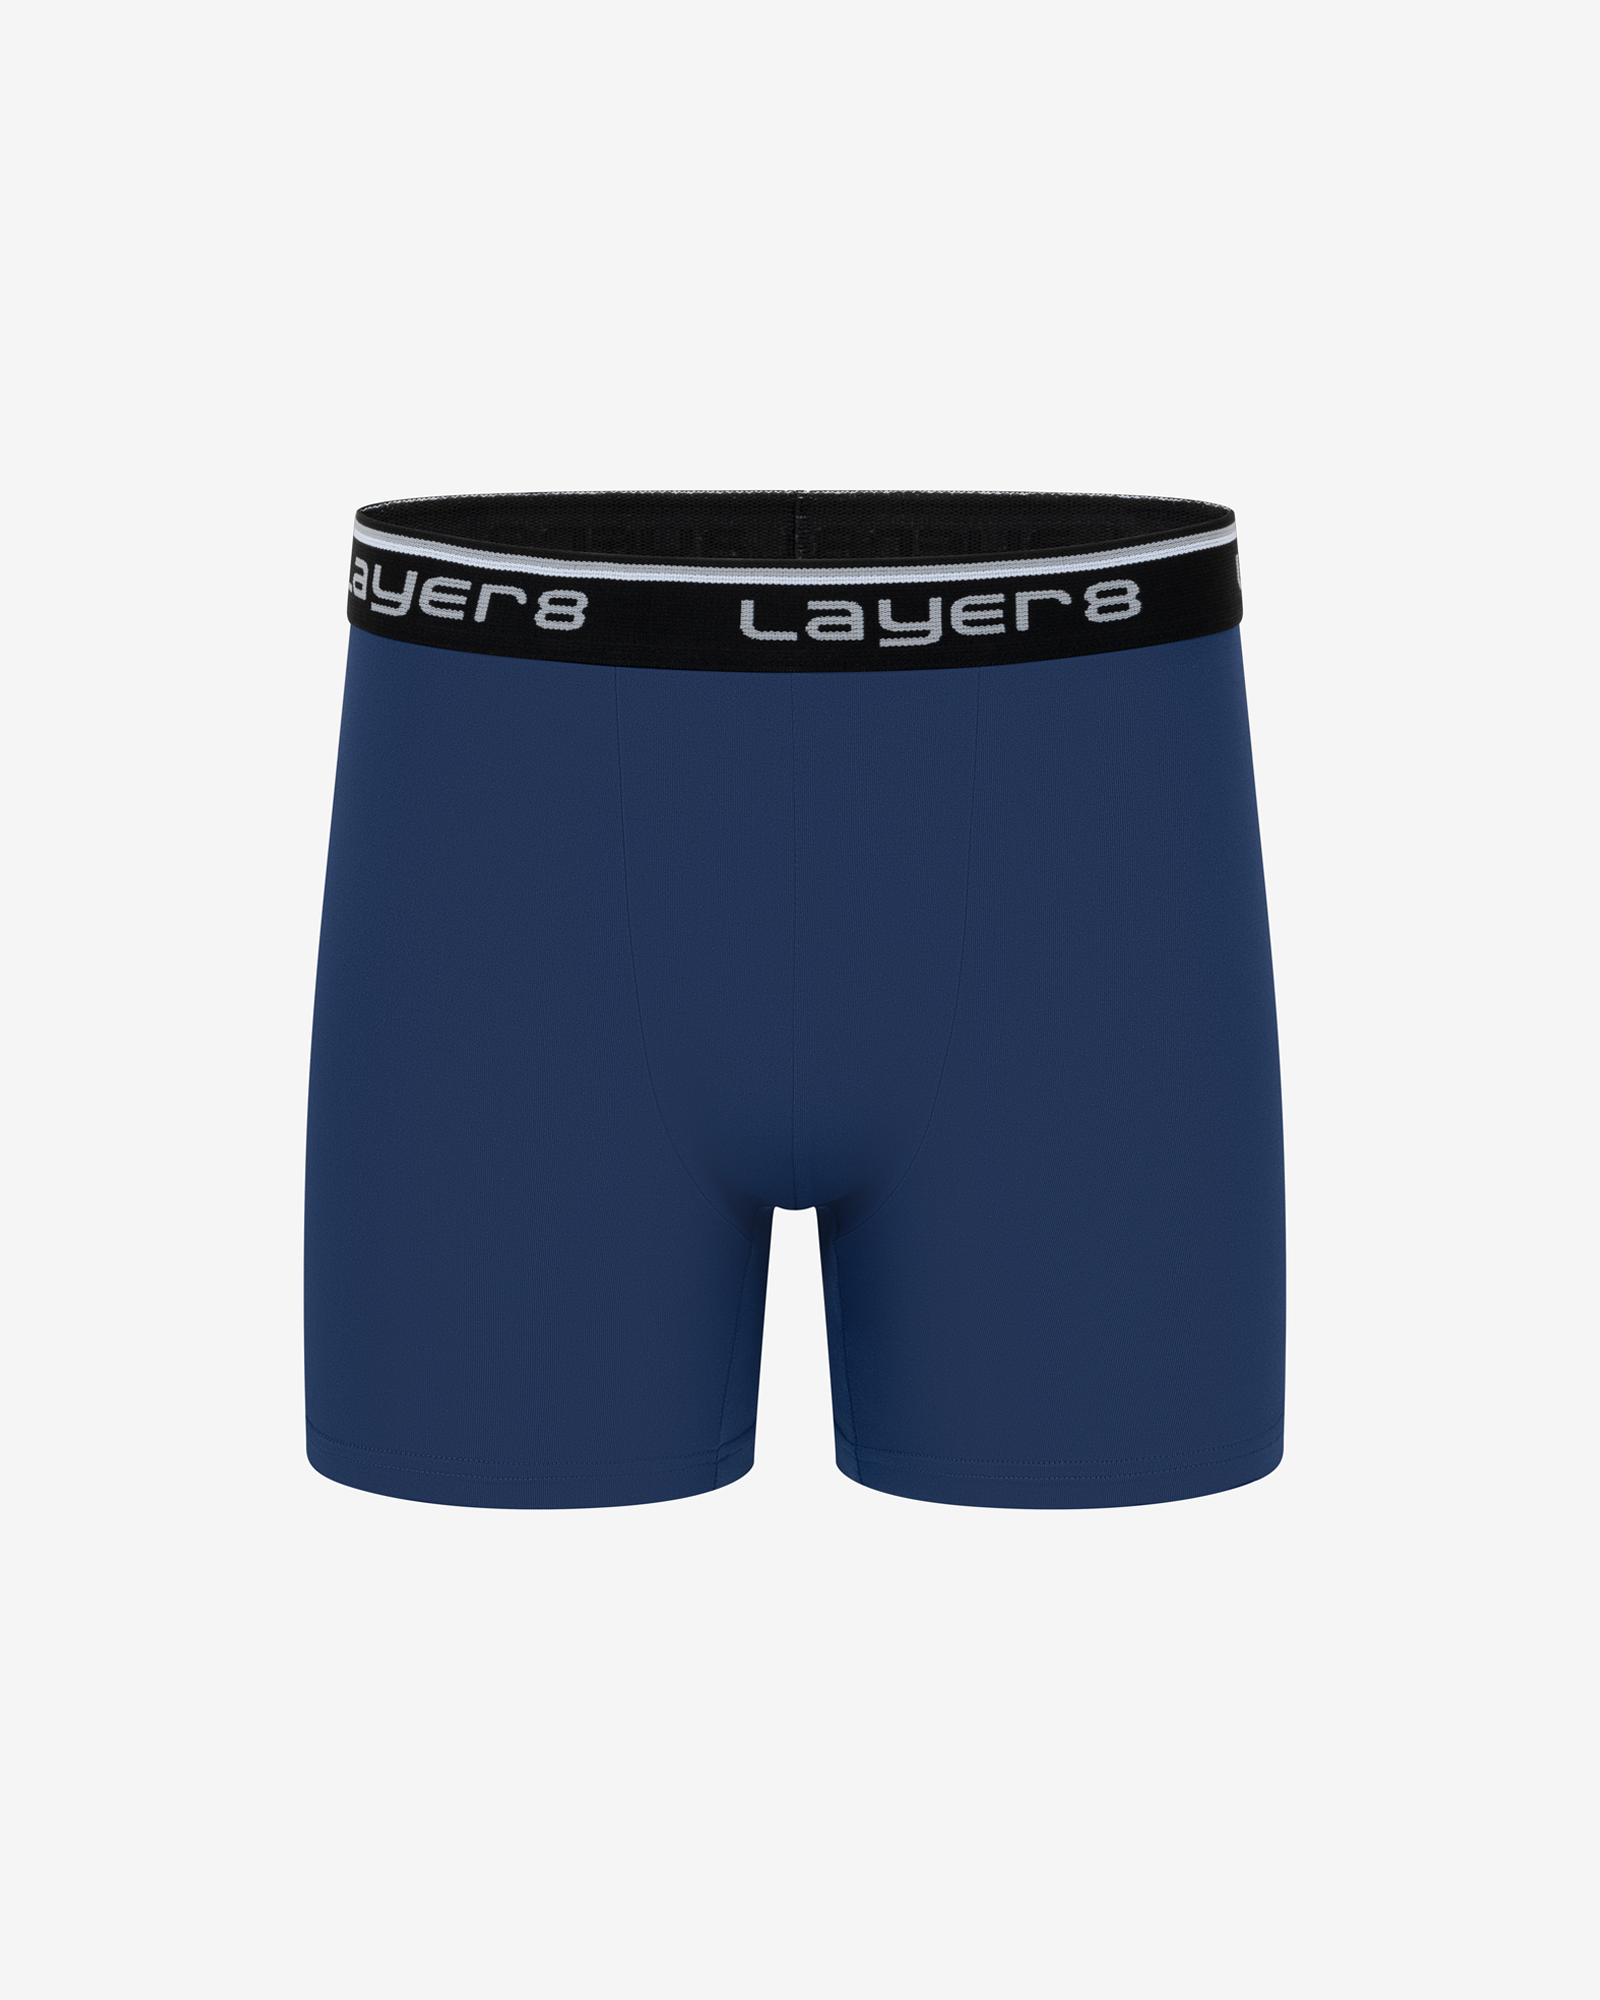 Layer 8 Men's 3 Pack Performance Sports Boxer Briefs